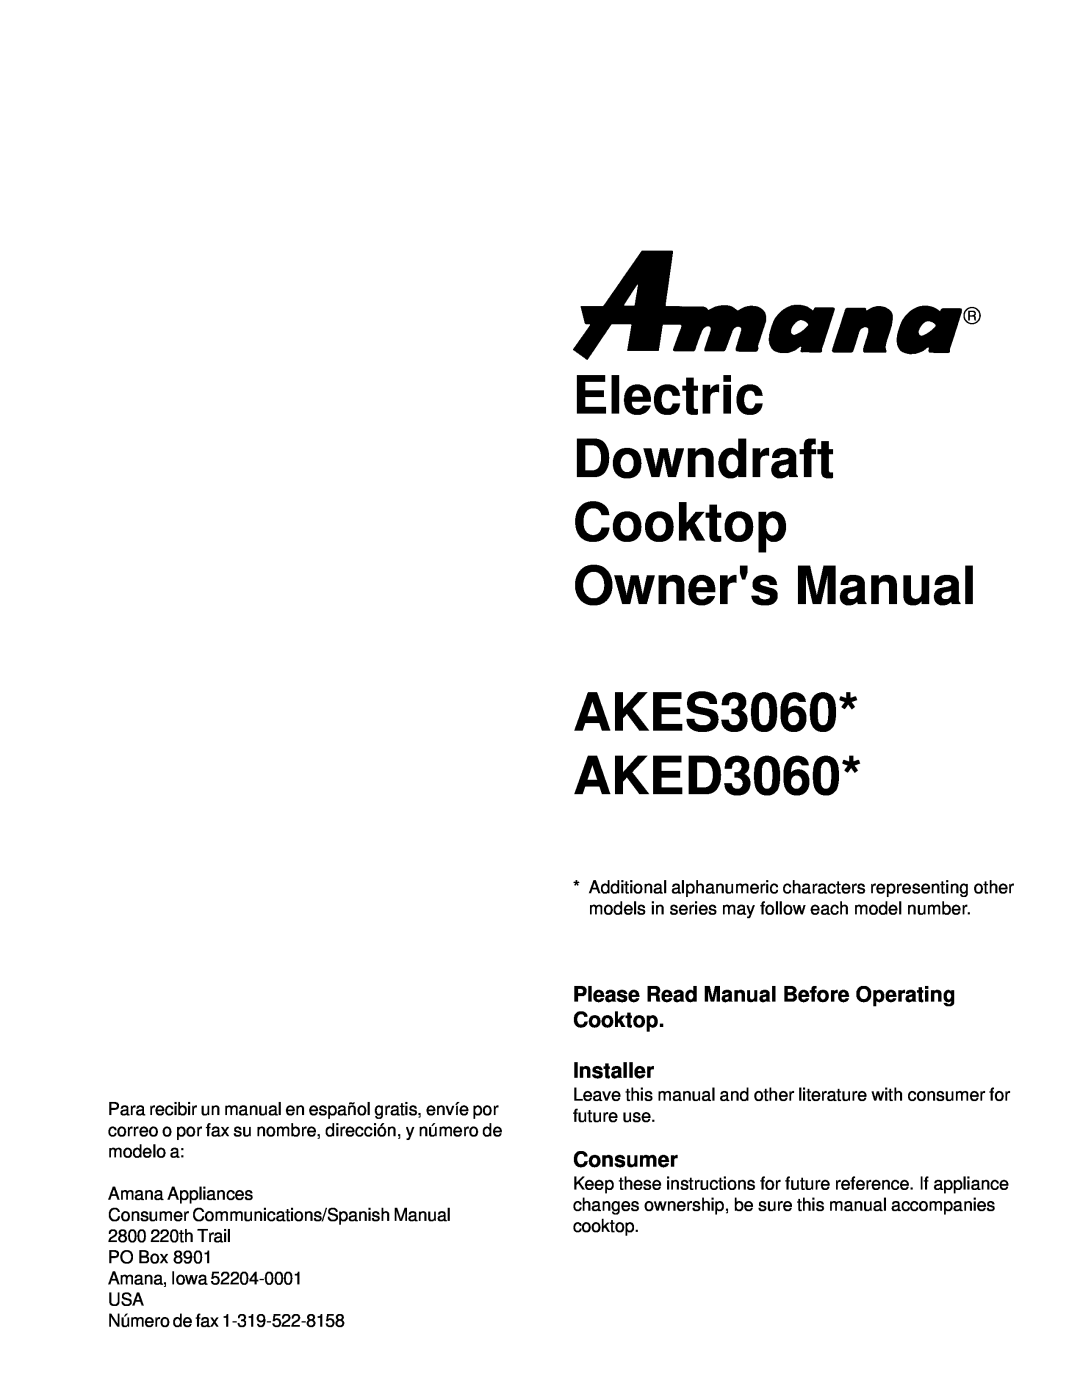 Amana AKED3060, AKES3060 owner manual Please Read Manual Before Operating Cooktop, Installer, Consumer 